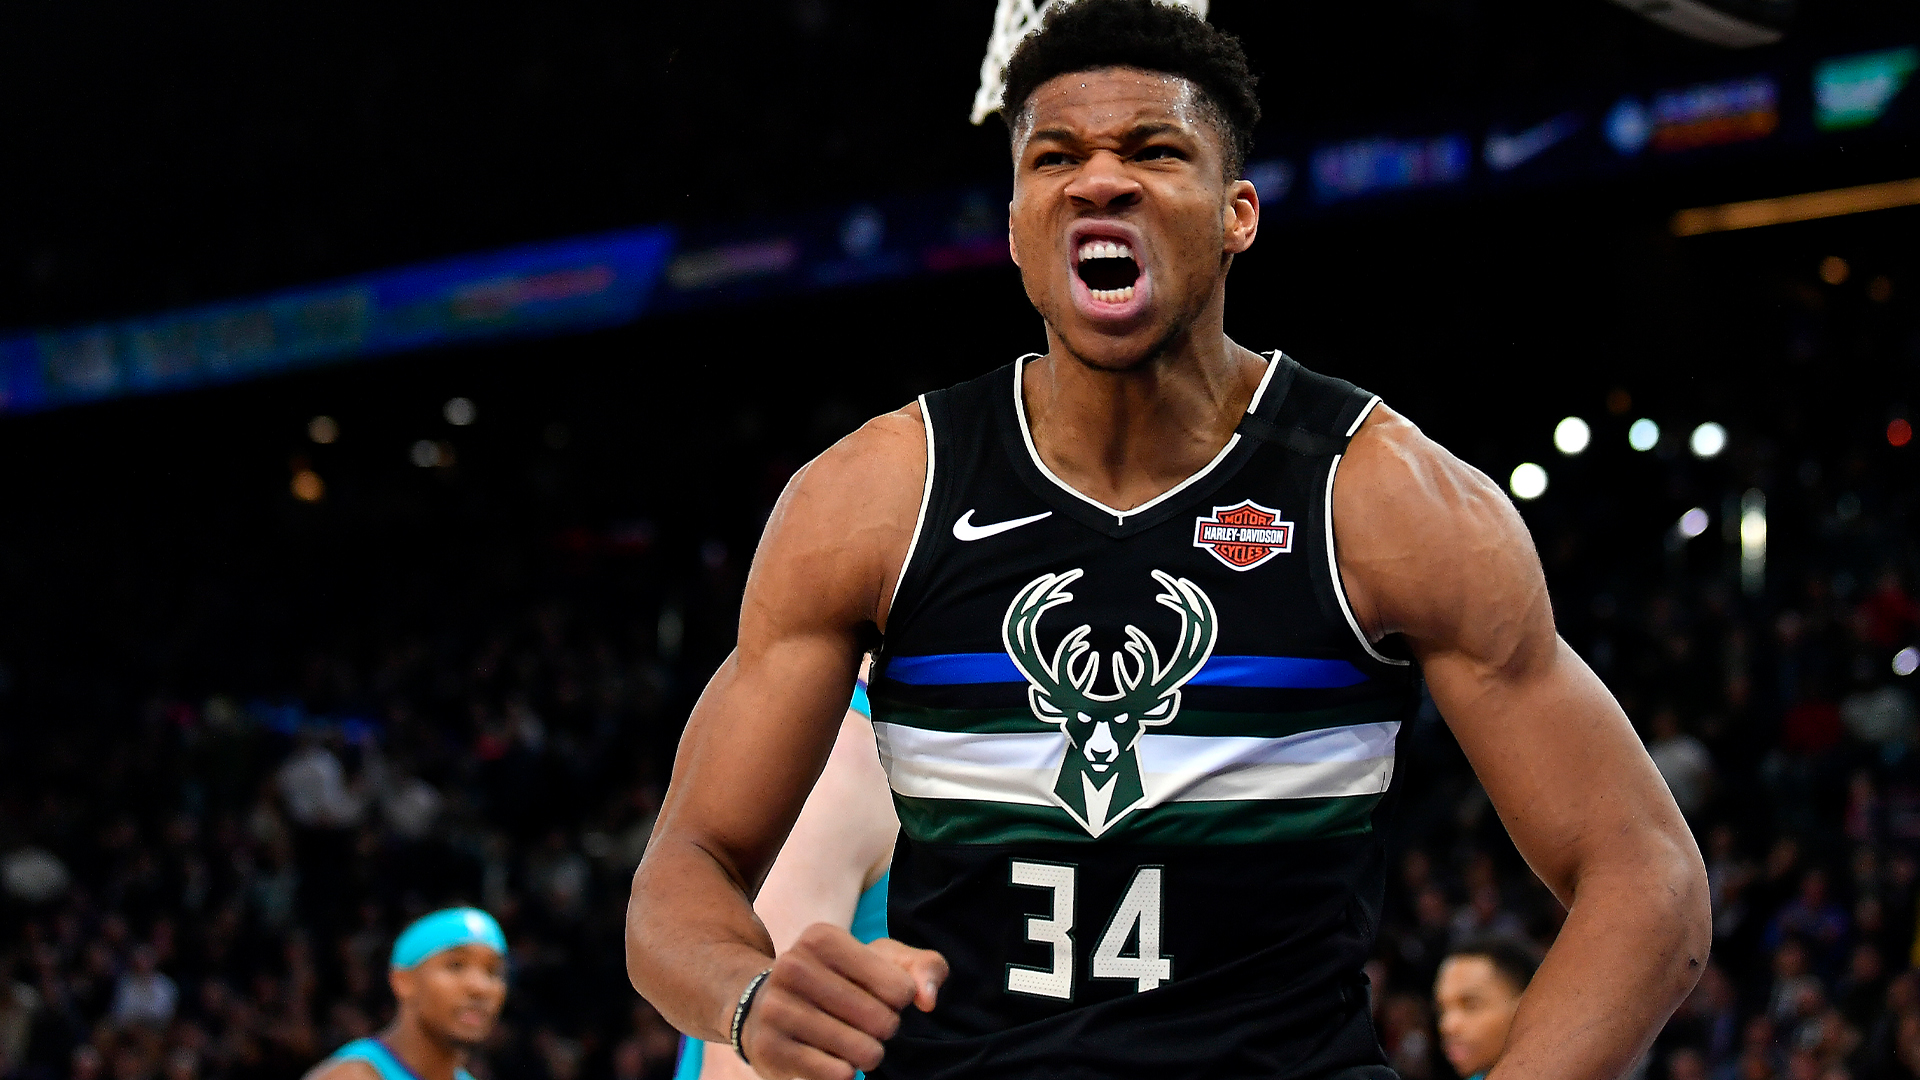 Giannis Antetokounmpo's NFT Sells For $187K, Becomes Highest Sale On Sorare NBA